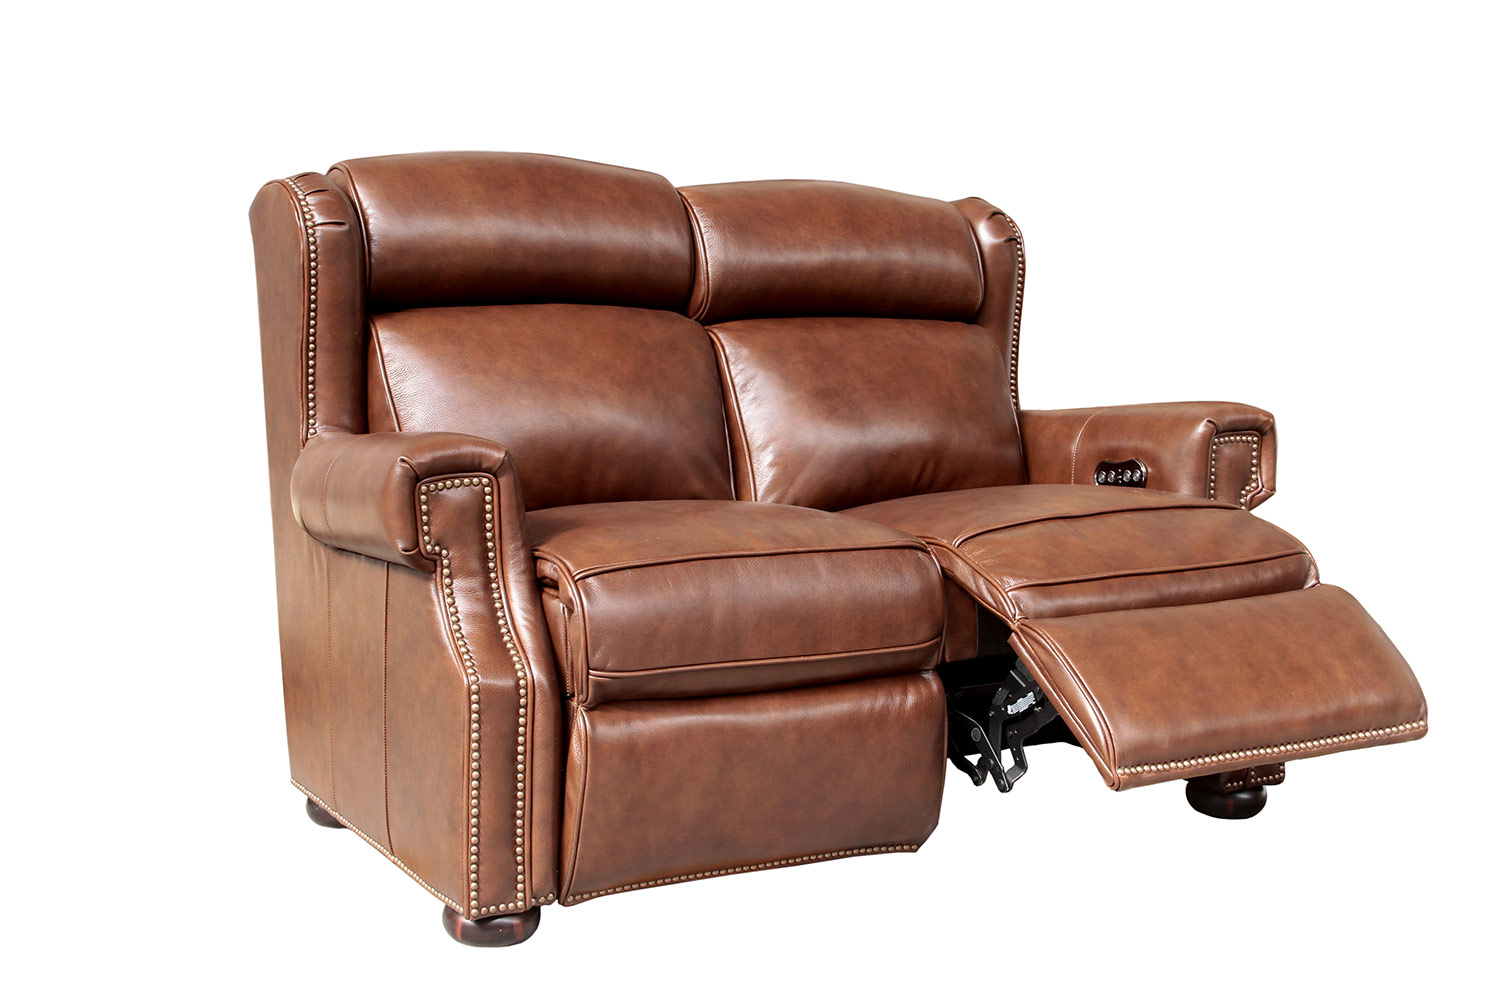 Barcalounger Benwick Power Reclining Loveseat with Power Head Rests - Shoreham Chocolate/All Leather